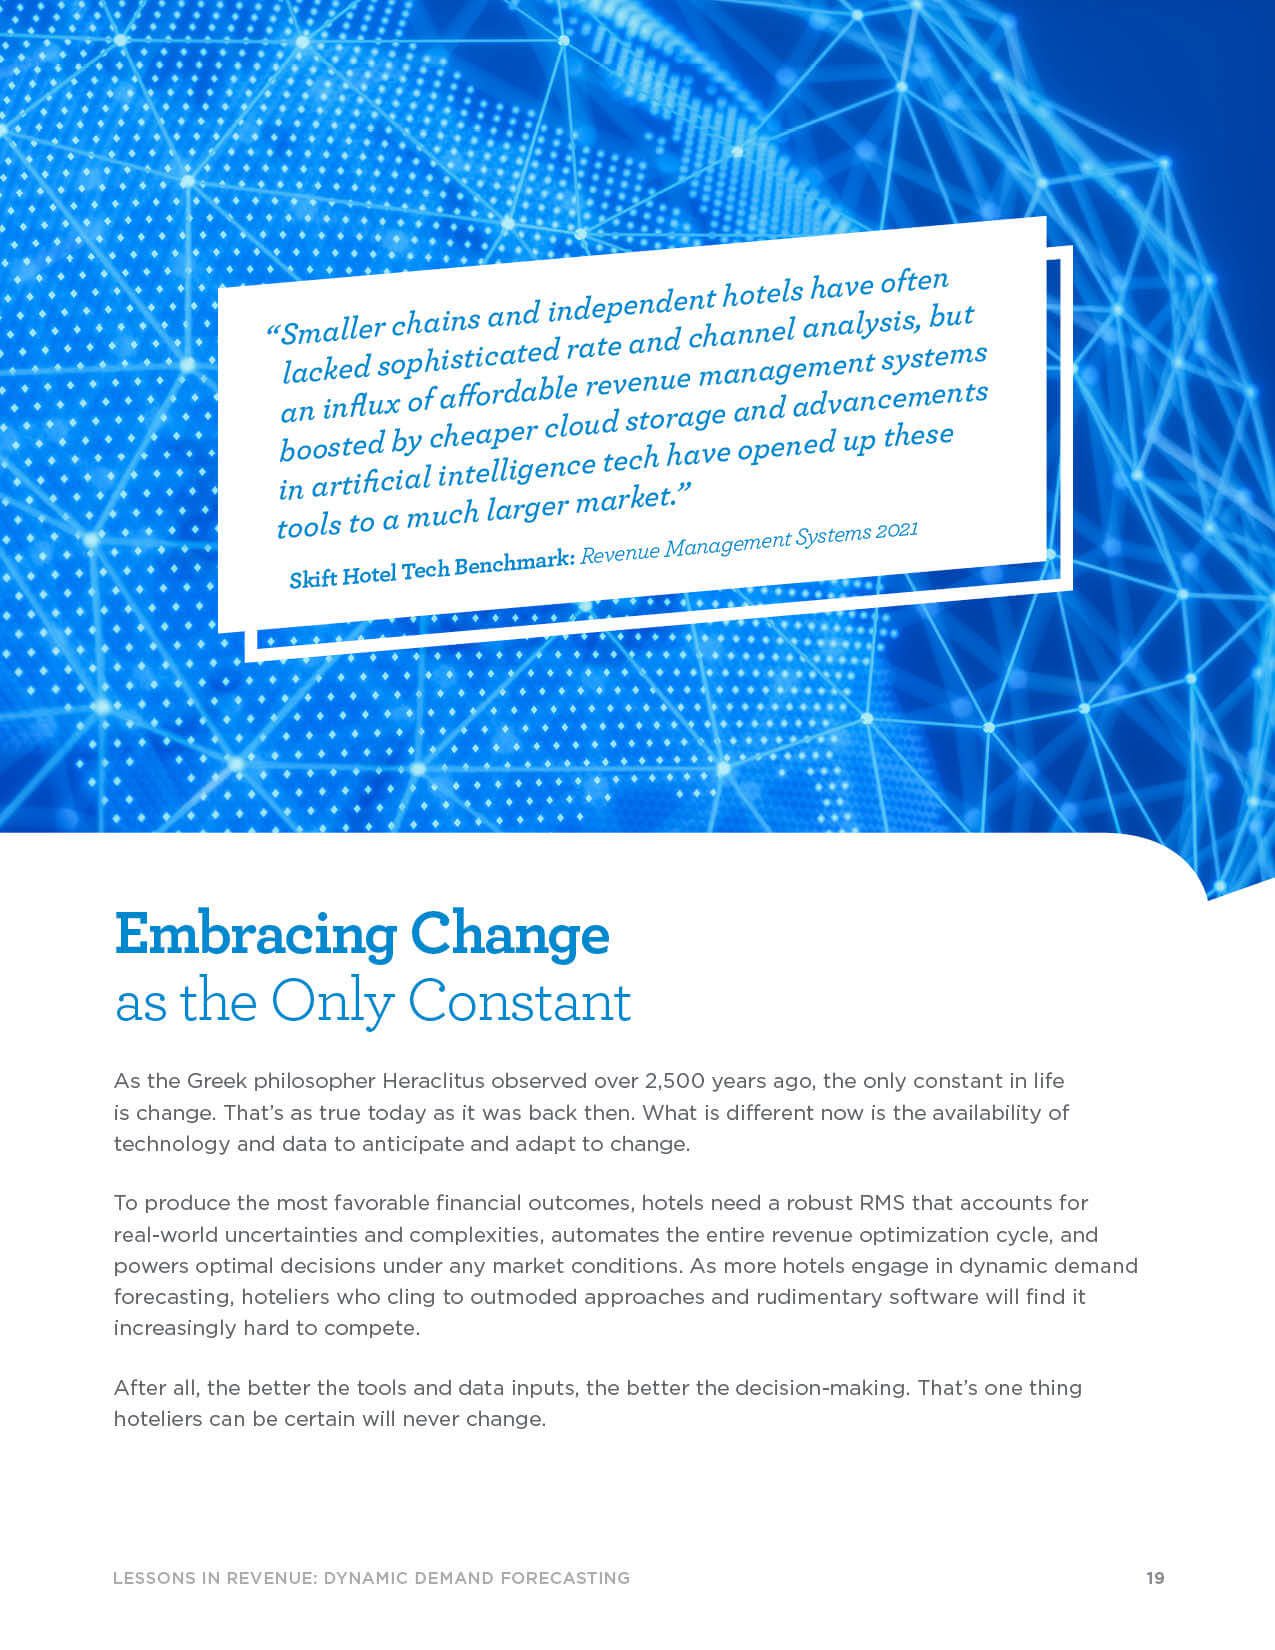 Page 19 - Embracing Change as the Only Constant